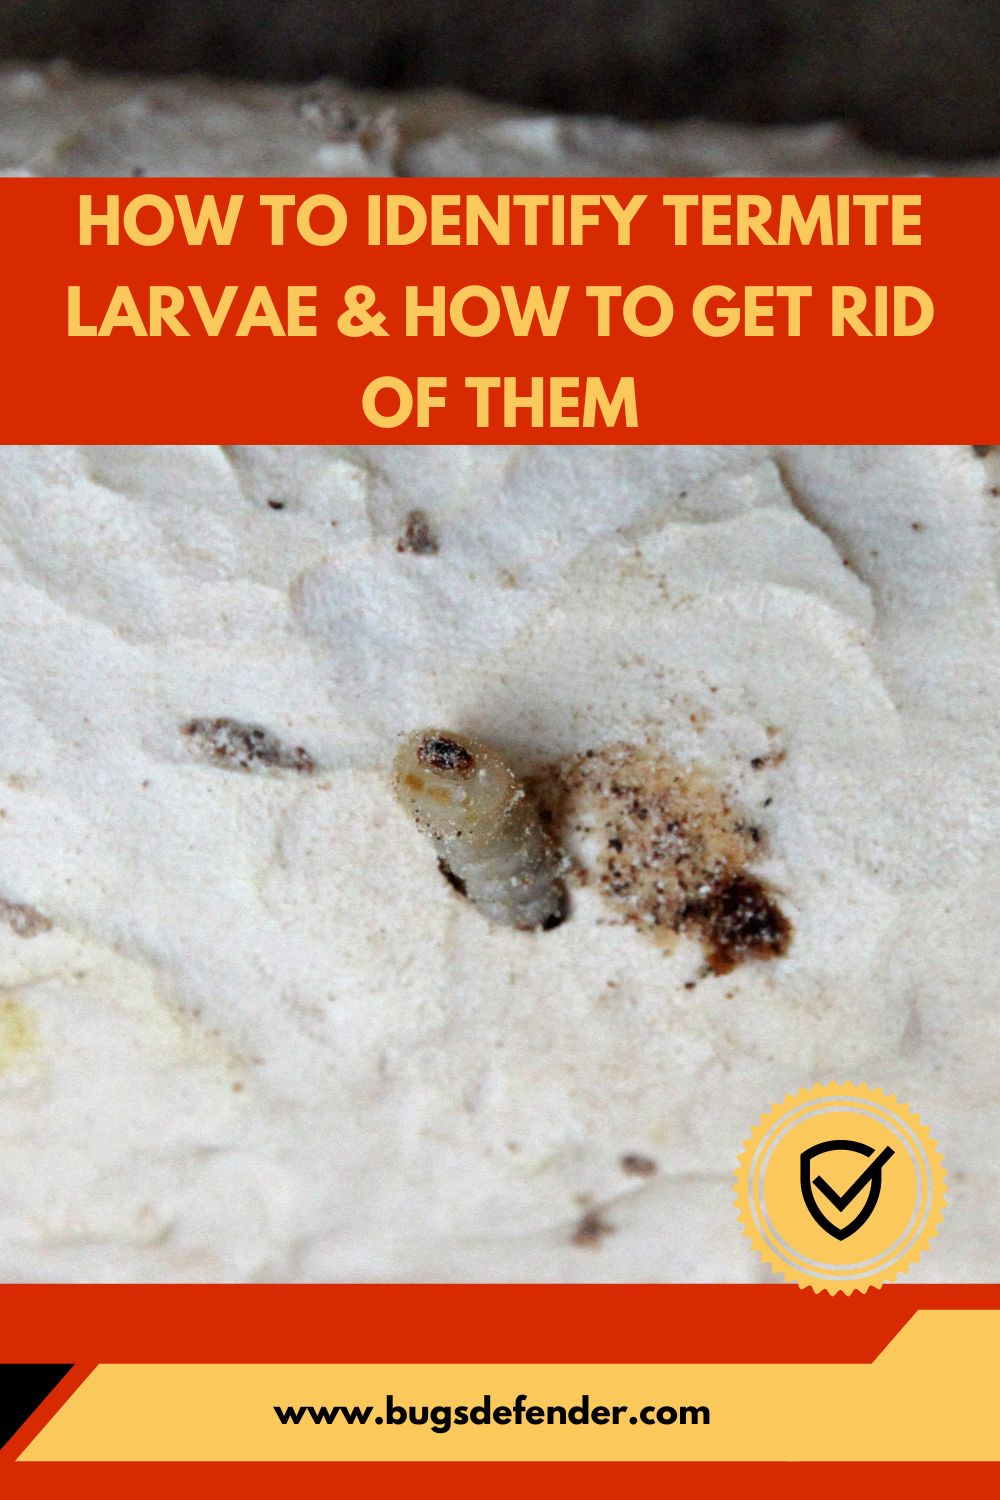 How To Identify Termite Larvae & How To Get Rid Of Them pin2